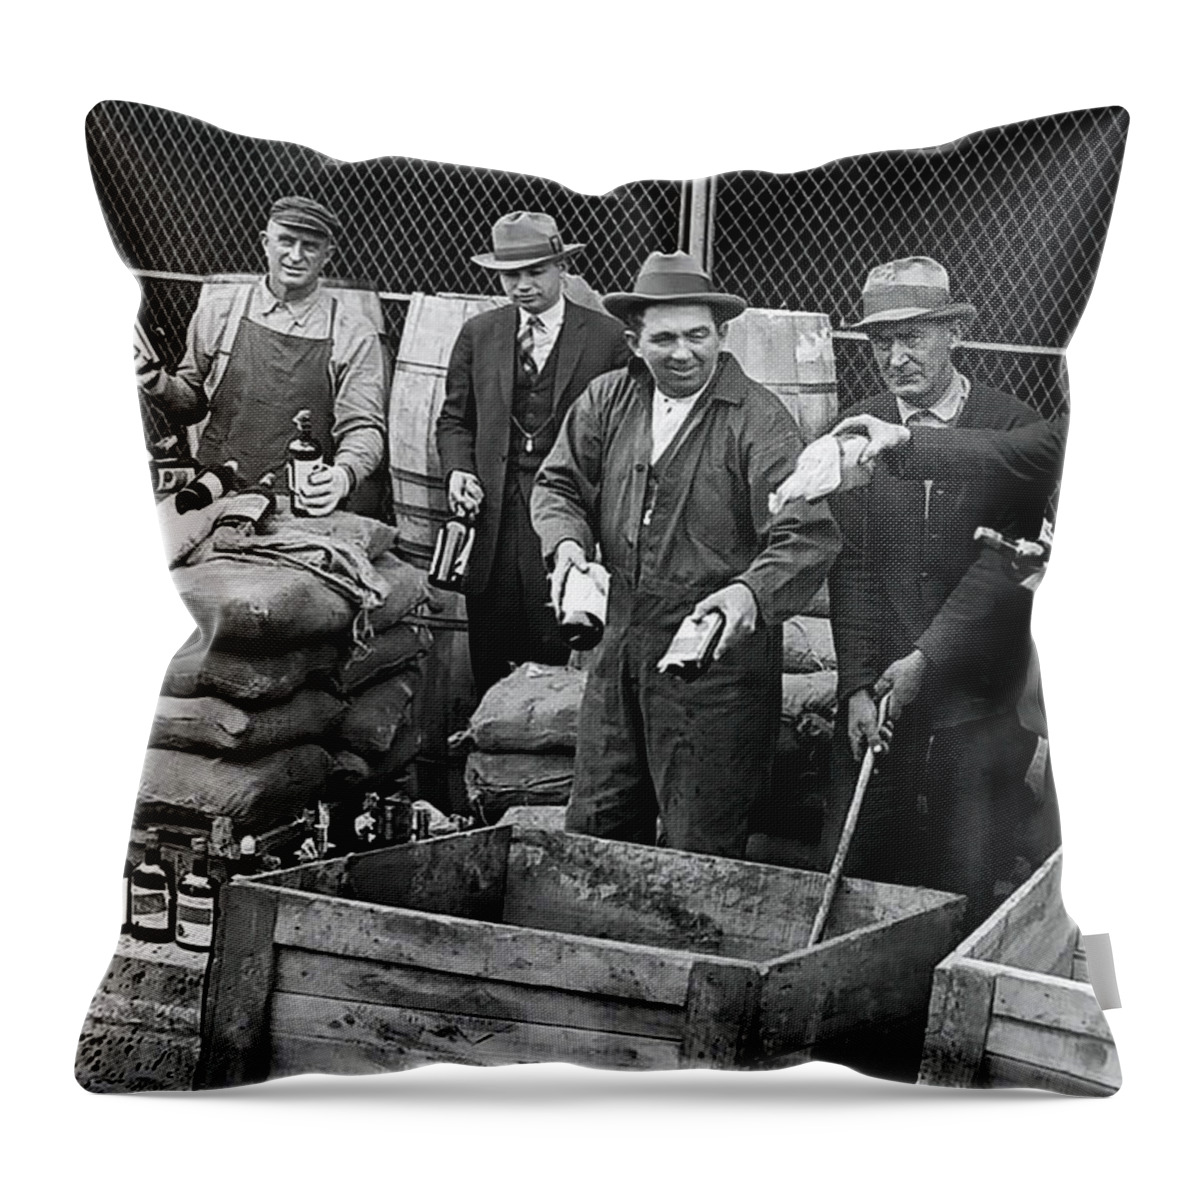 Prohibition. 20s Throw Pillow featuring the painting Funny Roaring Twenties No Prohibition Roaring 20s Gift Prohibition Liquor by Tony Rubino